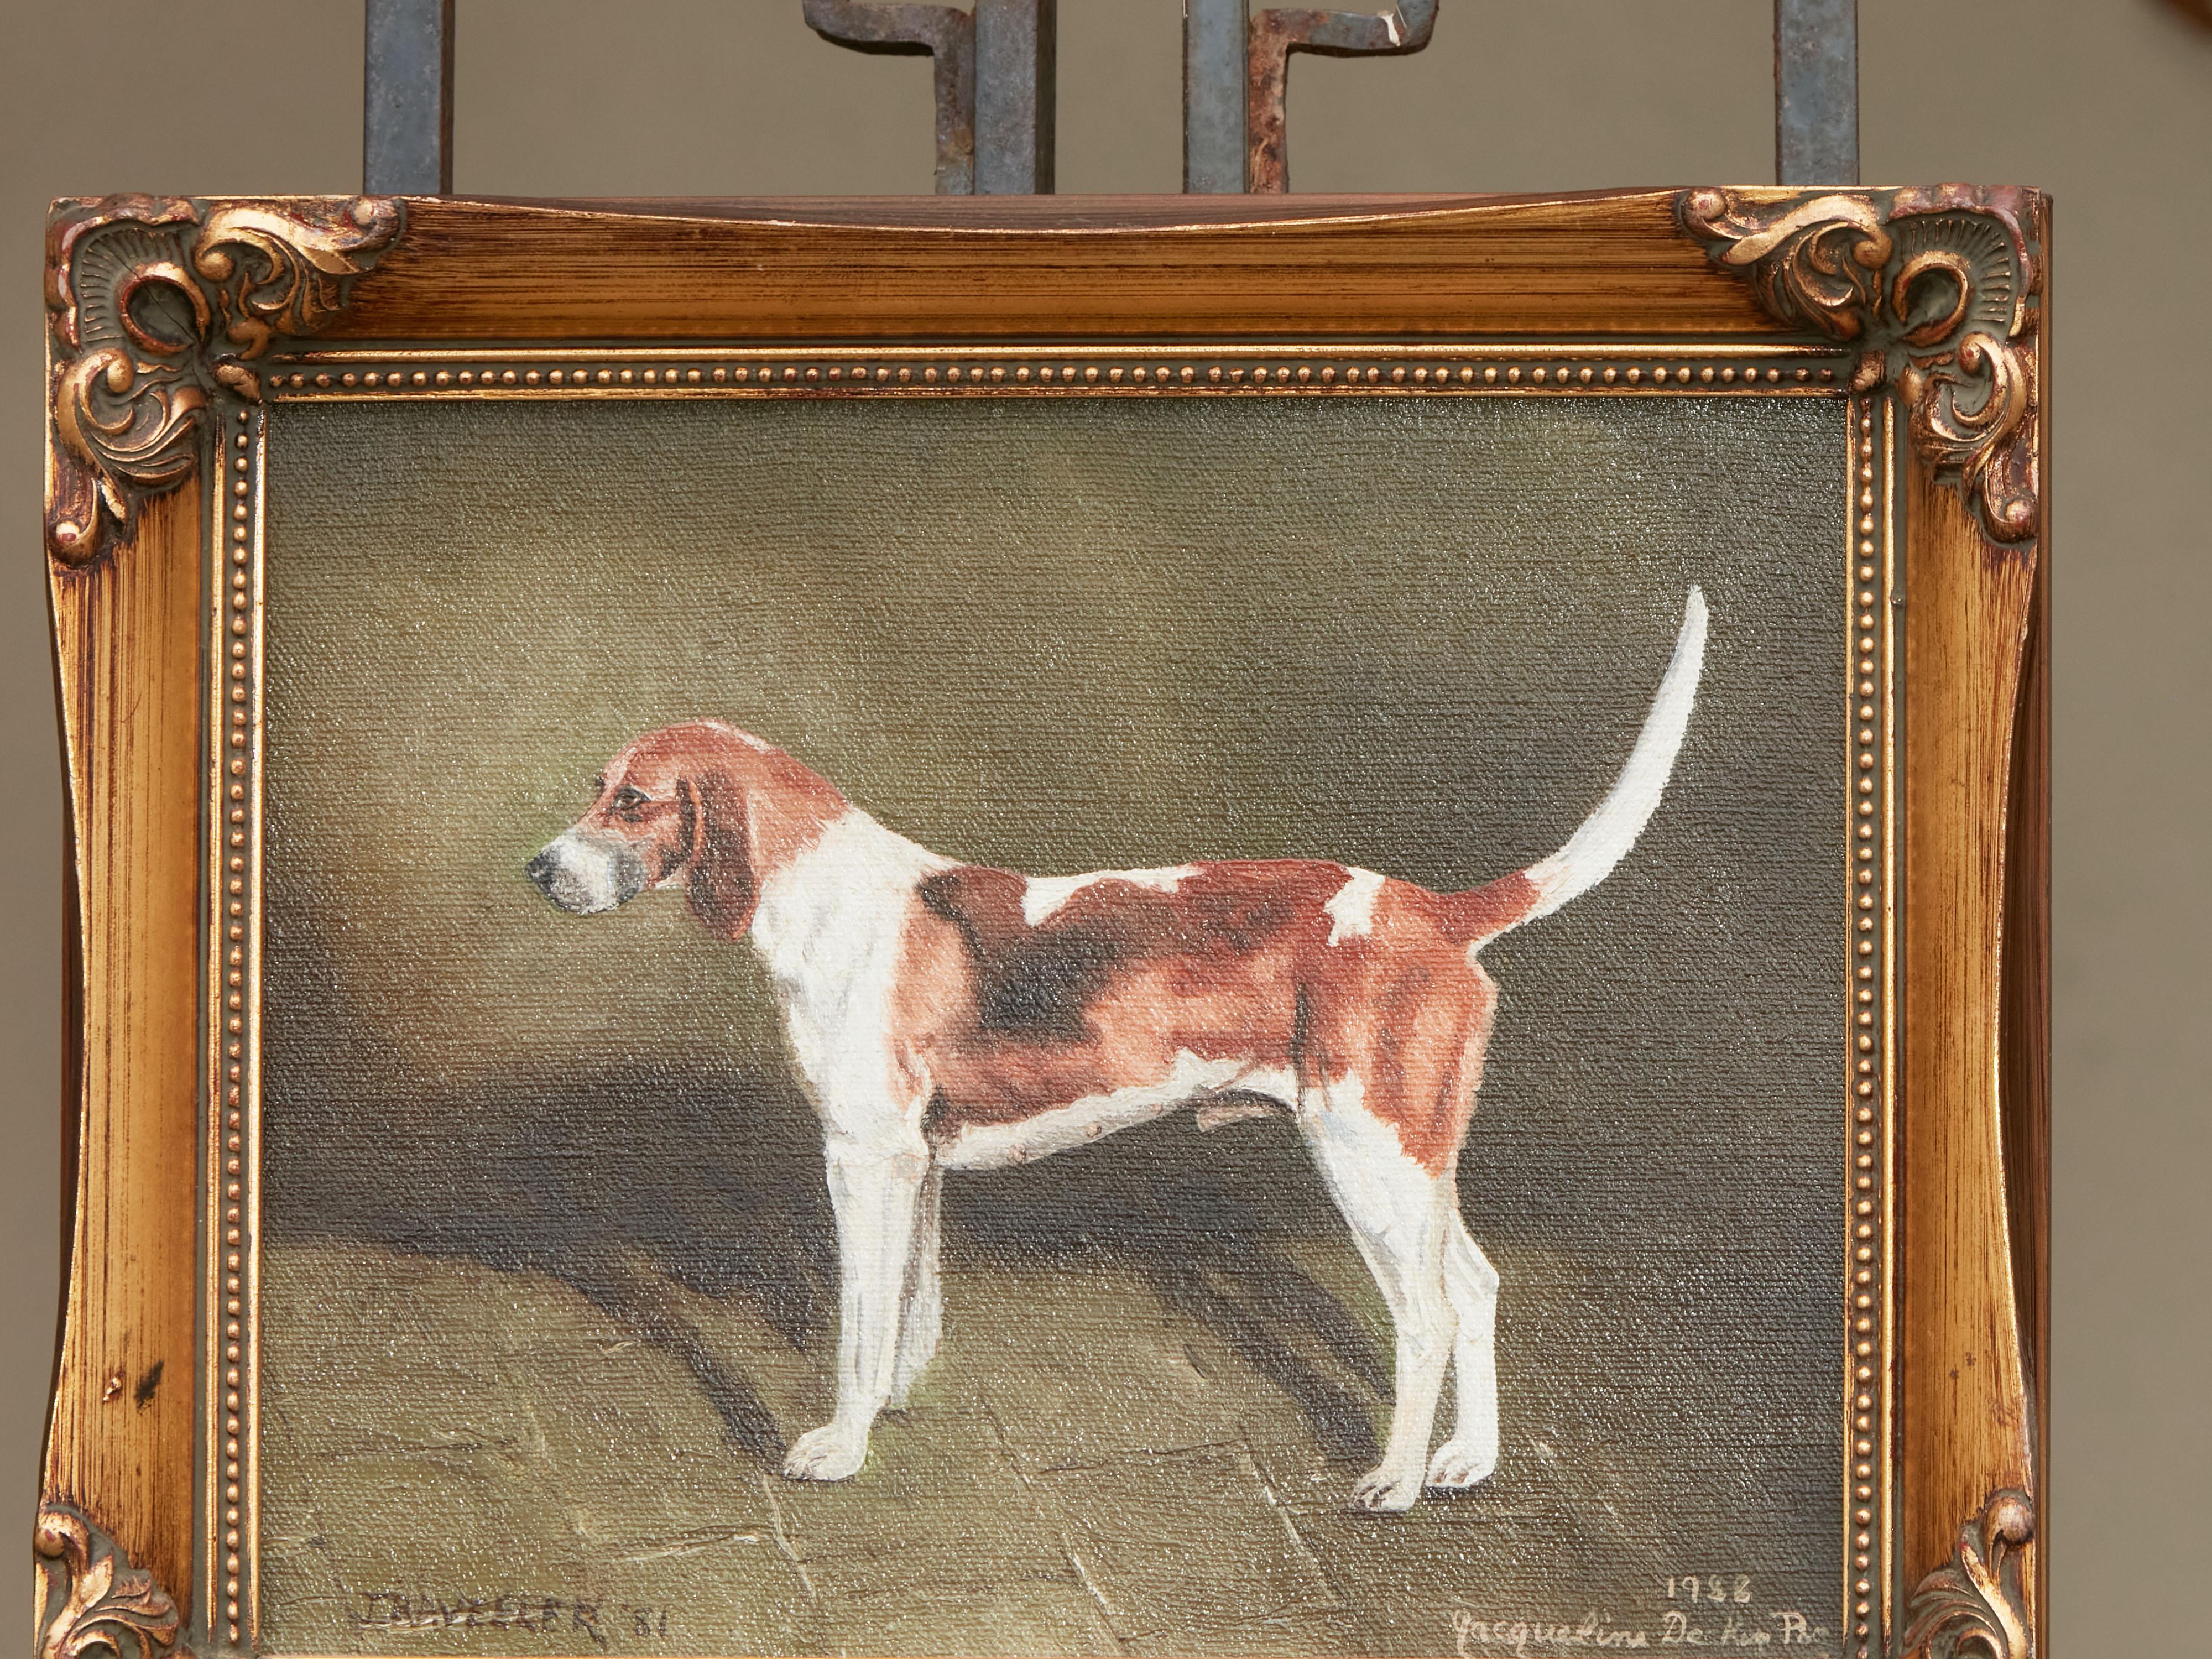 American Oil on Canvas Dog Painting Depicting a Belvoir Hound, Signed Jacqueline Decker